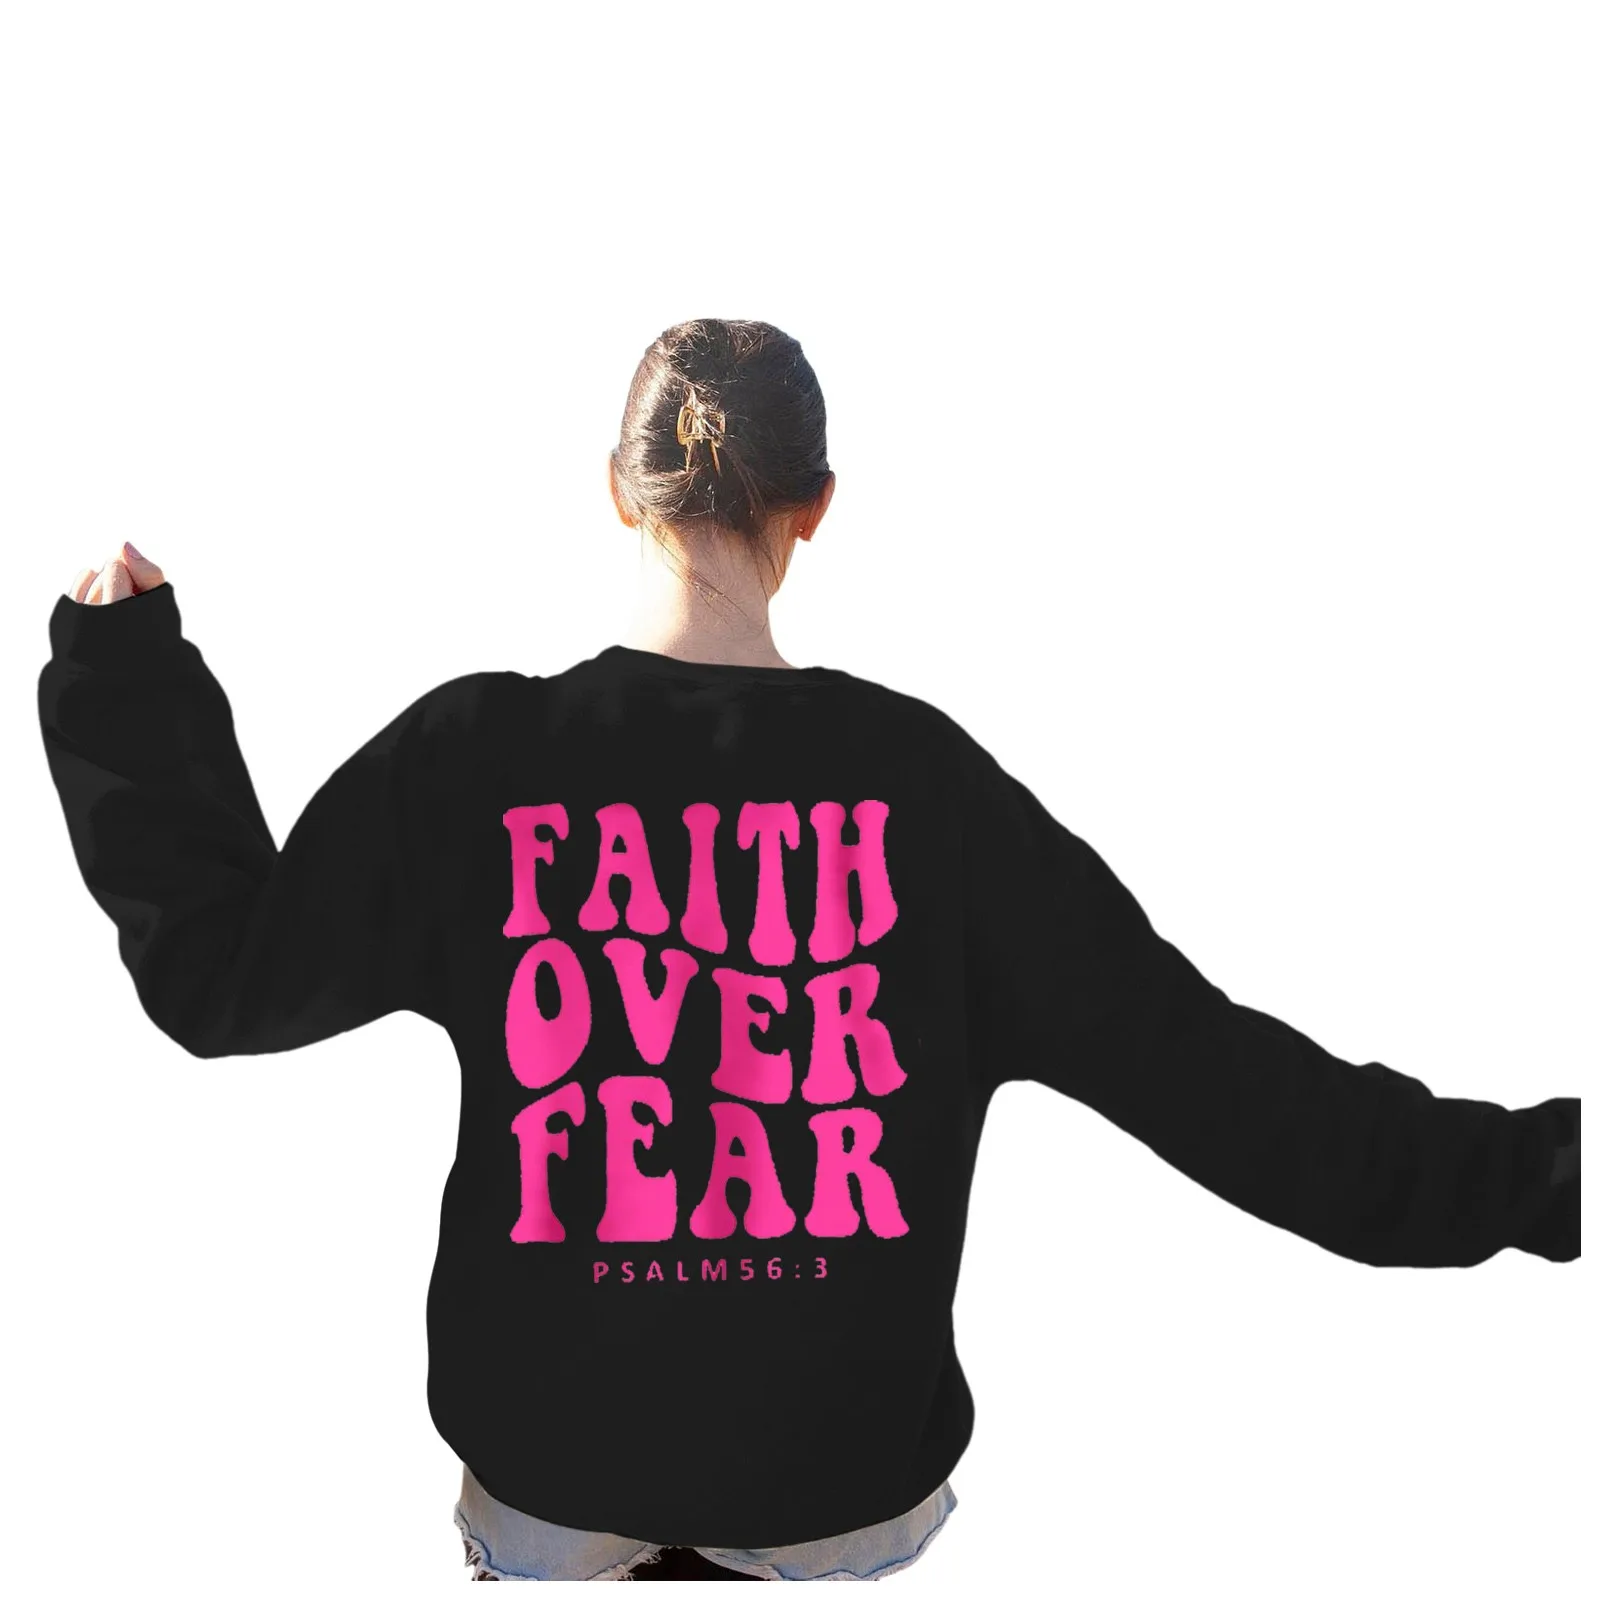 

Autumn Soft Warm Female Pullover With Faith Over Fear Psalm 56:3 Letter Printing For Women Fashion Oversize Casual Fleece